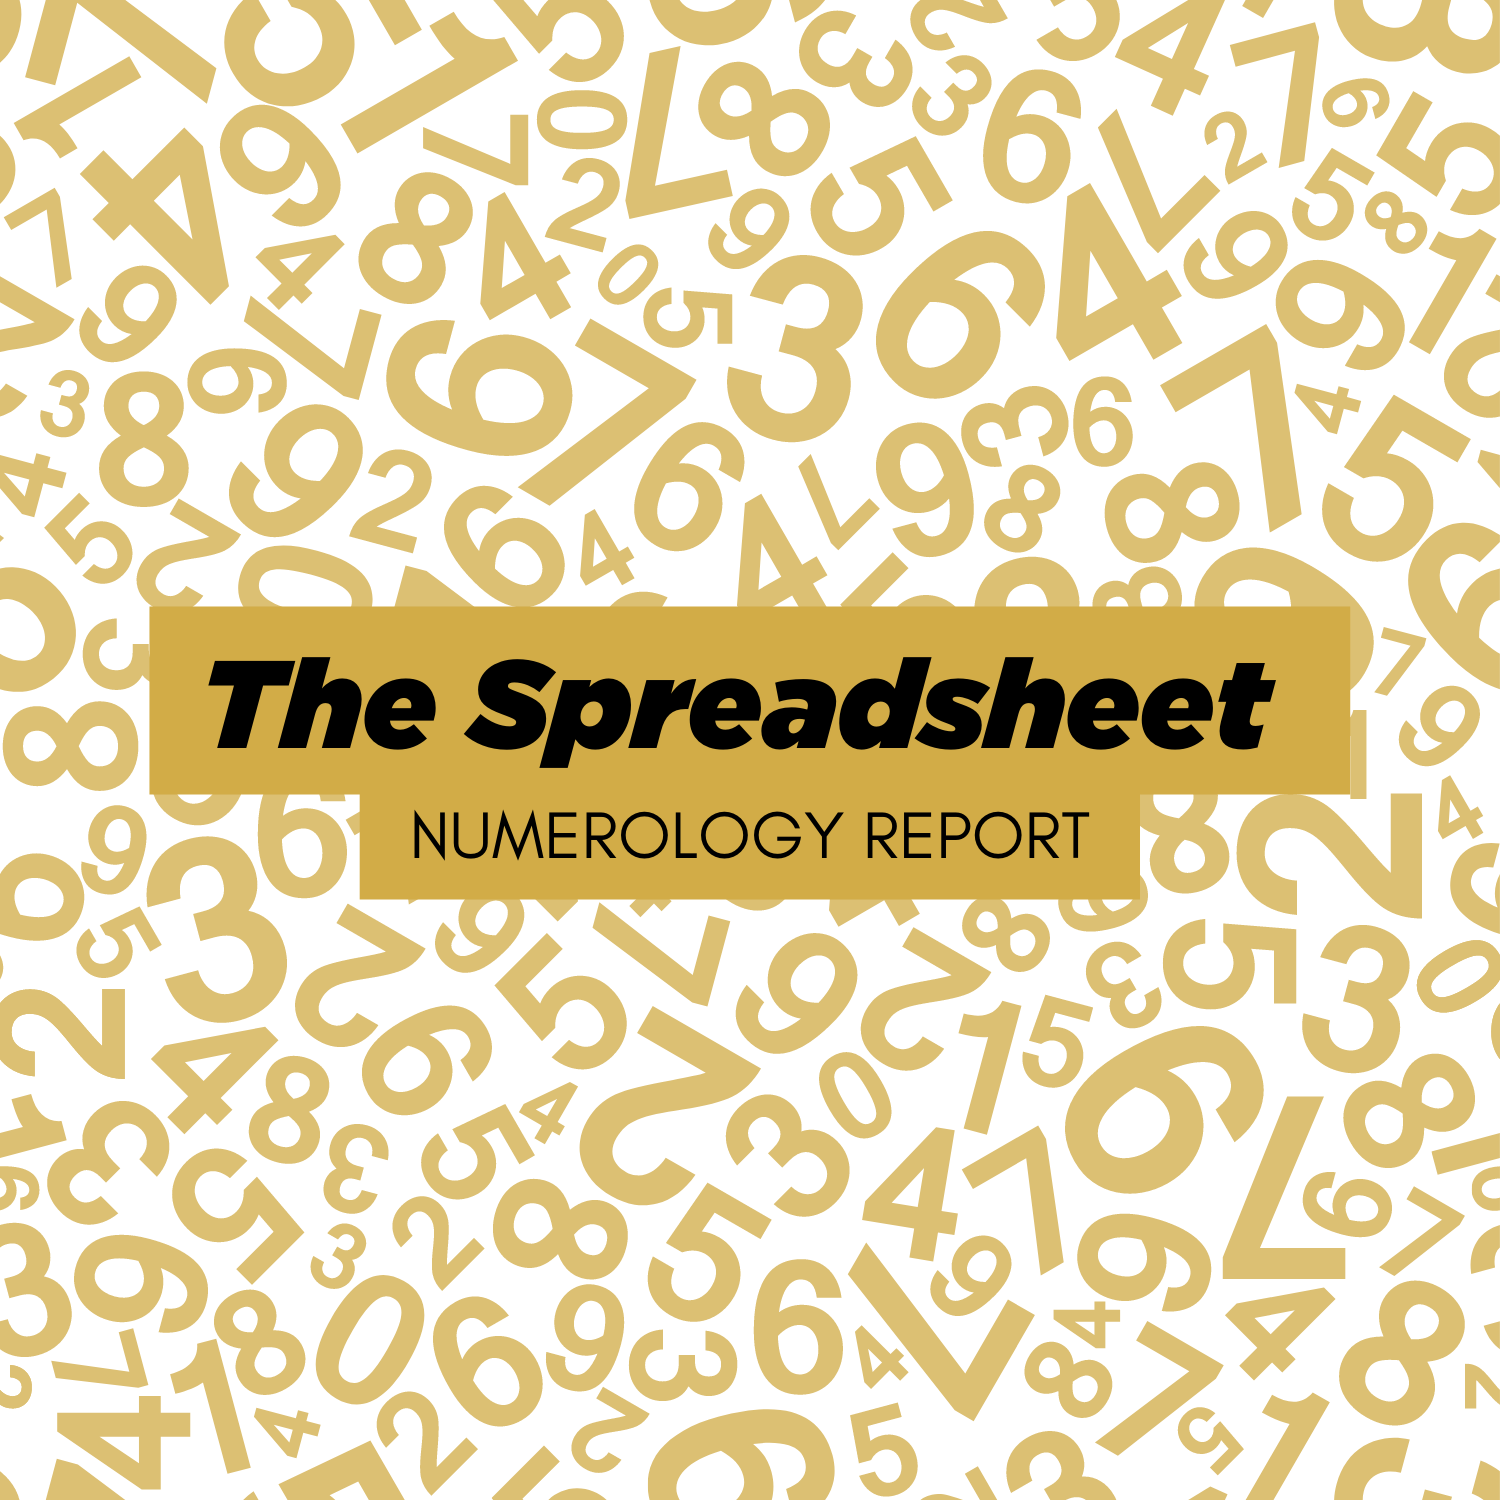 The Spreadsheet | Numerology Report